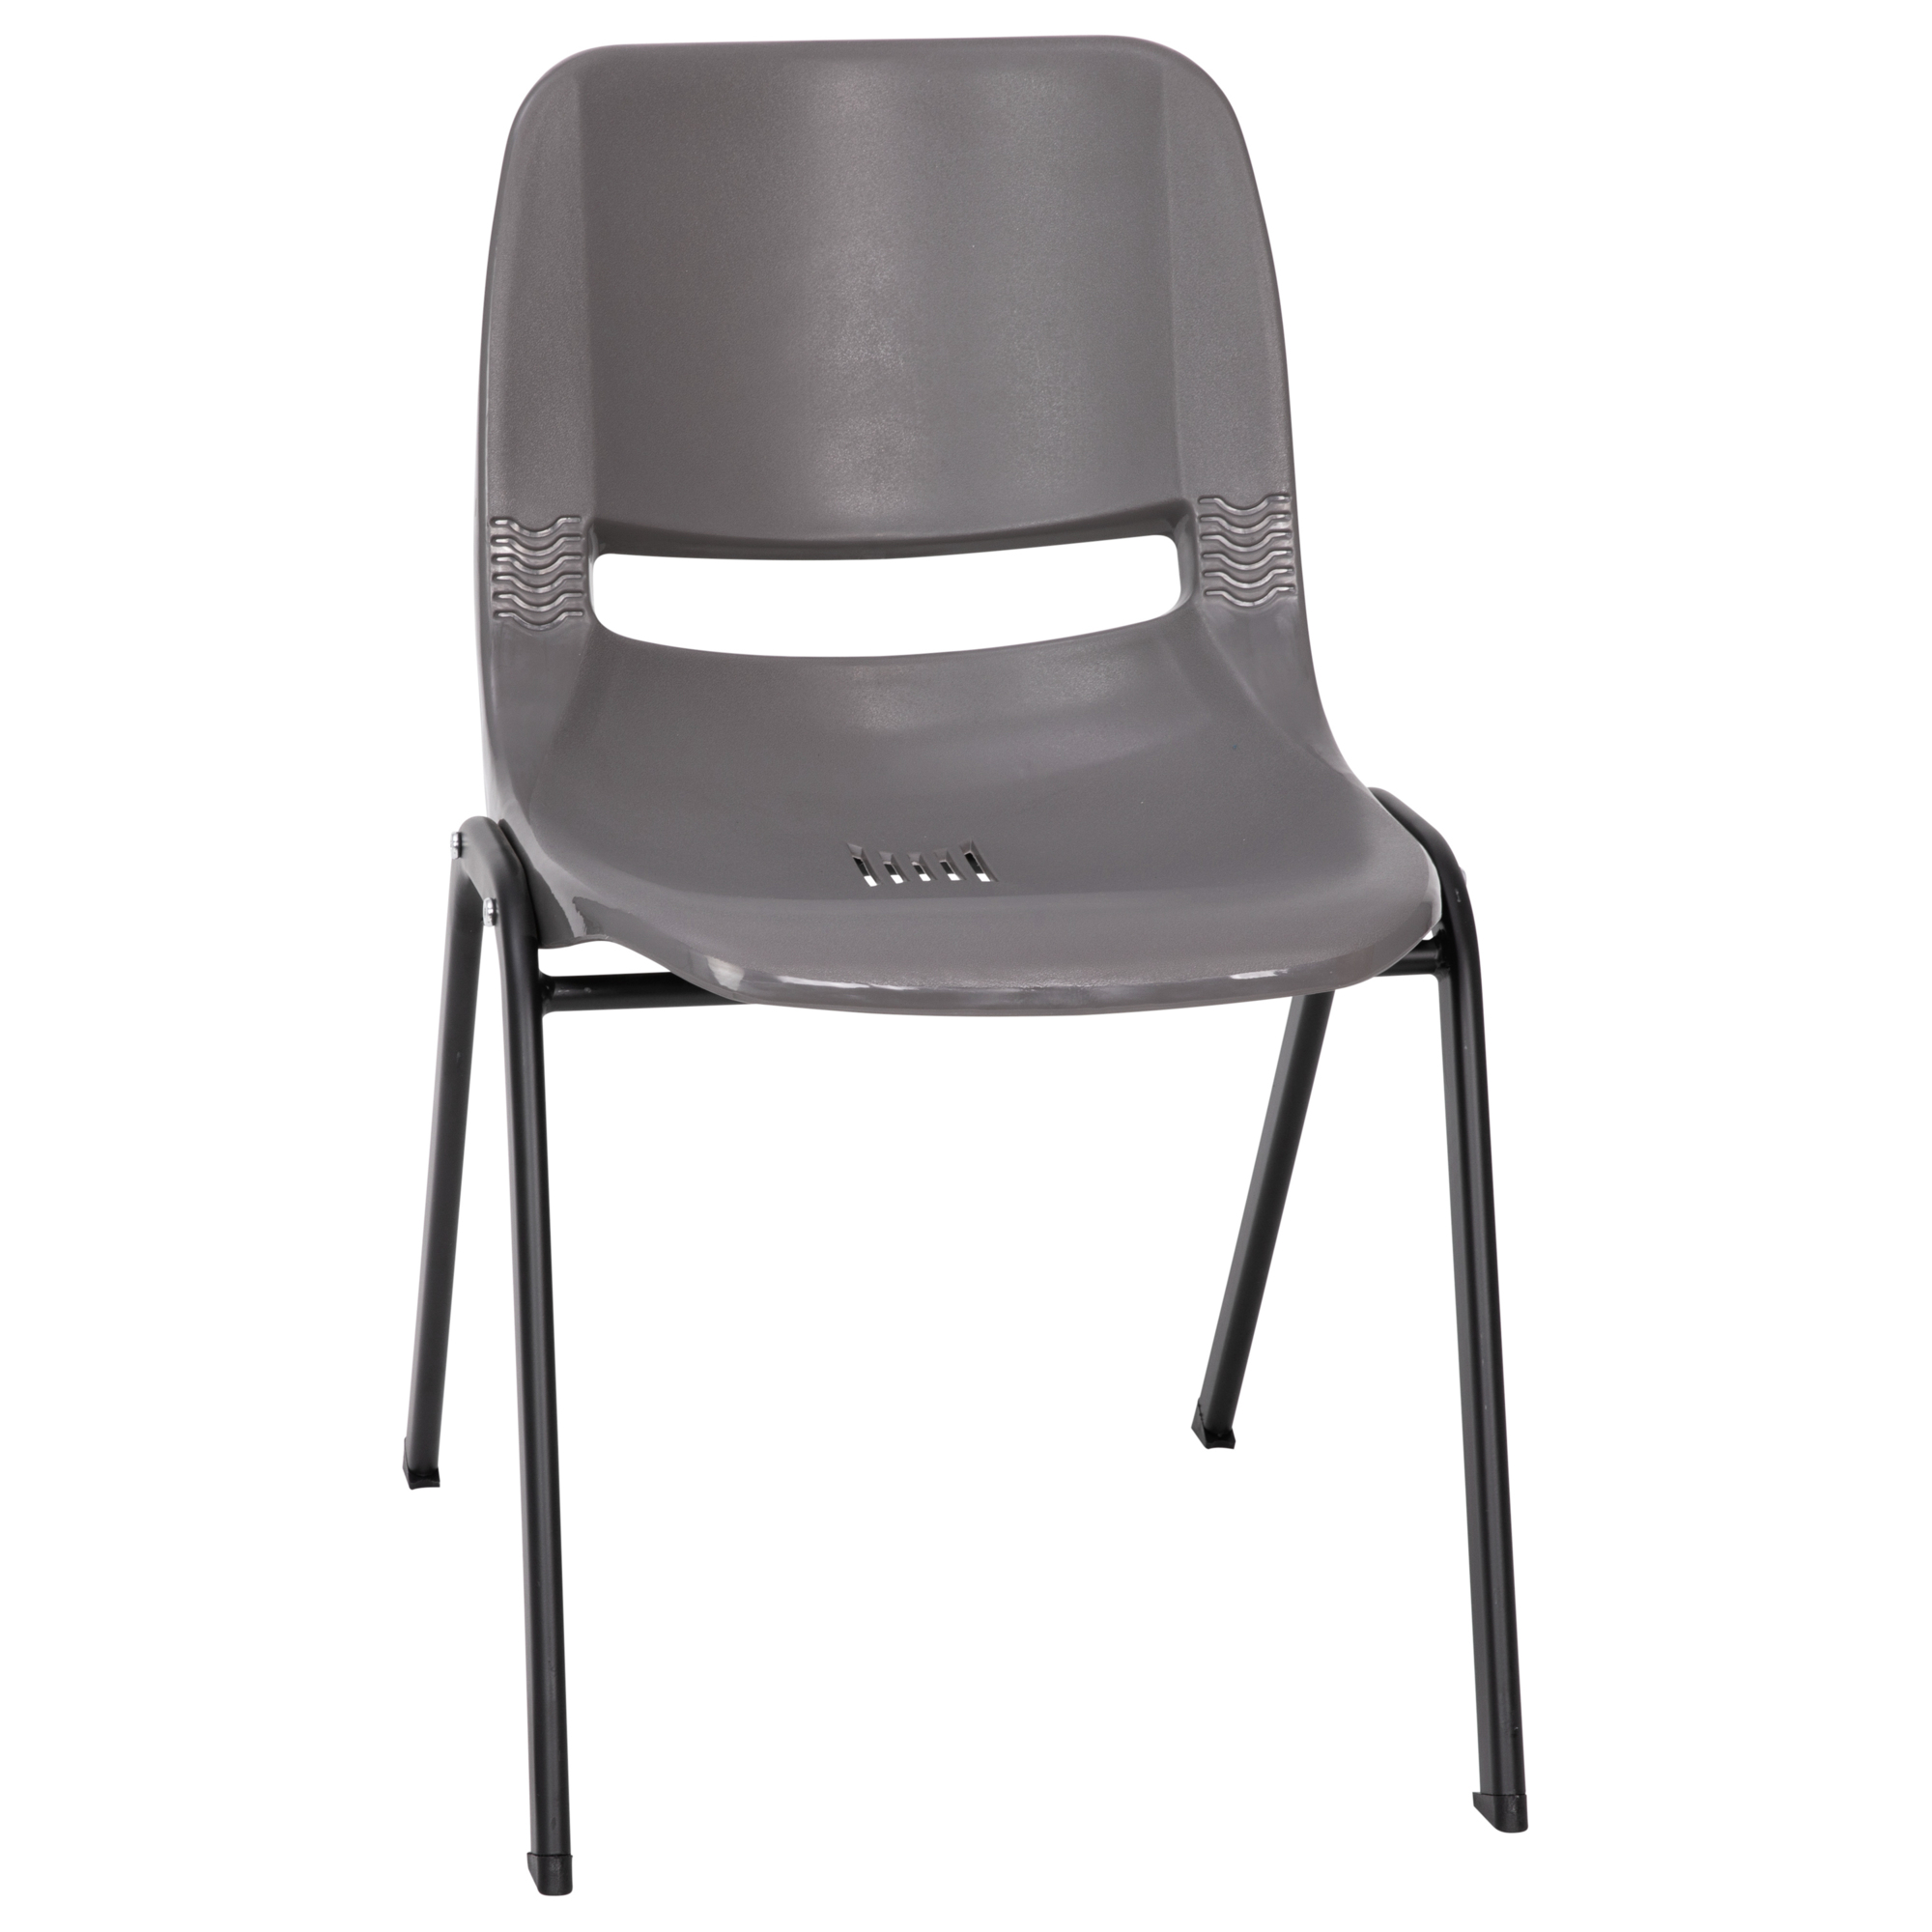 Flash Furniture, 661 lb. Capacity Gray Stack Chair w/ Black Frame, Primary Color Gray, Included (qty.) 1, Model RUT16PDRGY